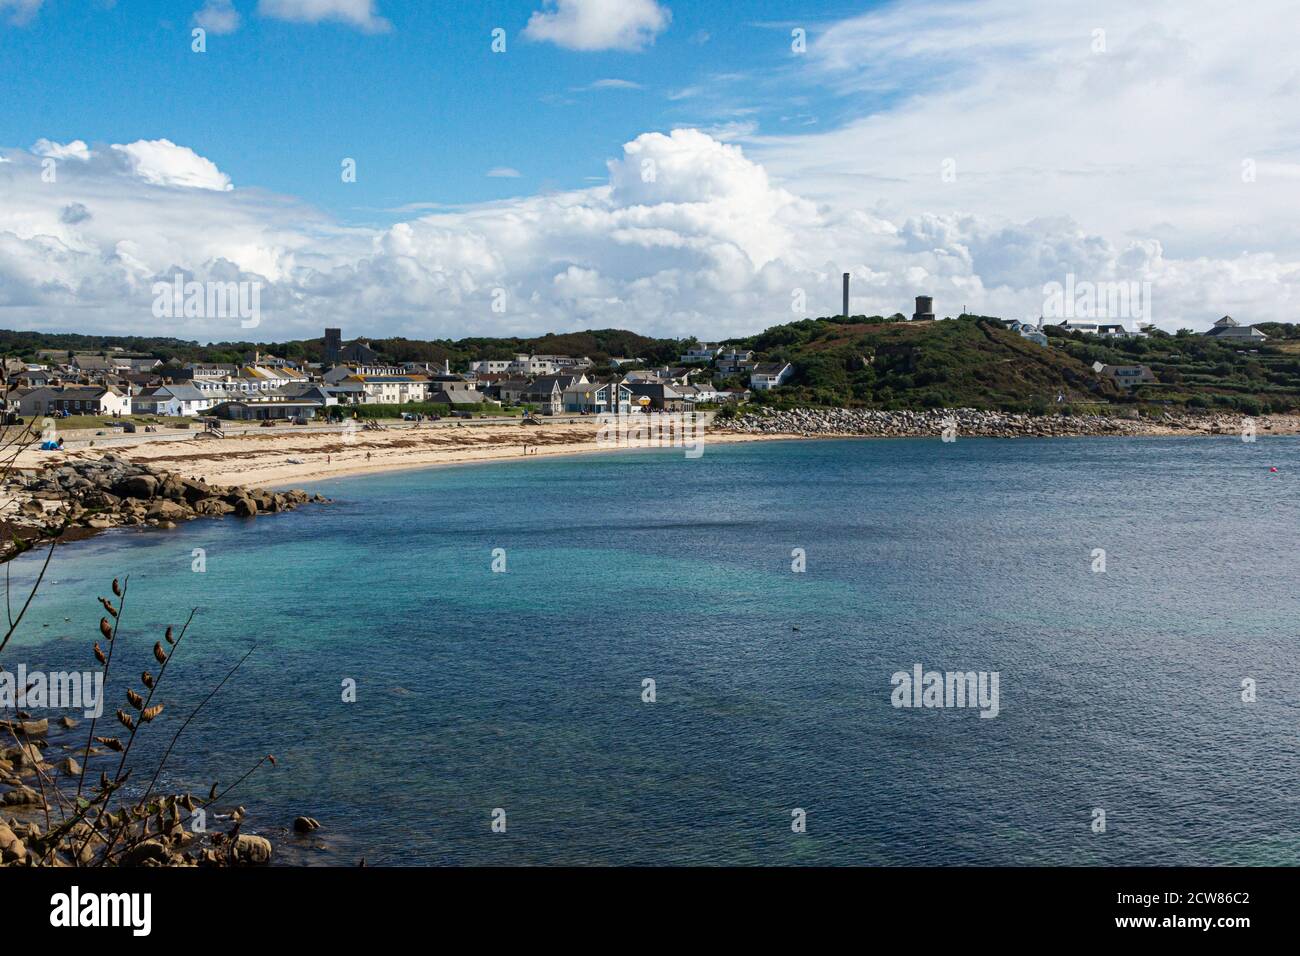 Porthcressa Beach seen from the Garrison, St Mary's, Isles of Scilly Stock Photo